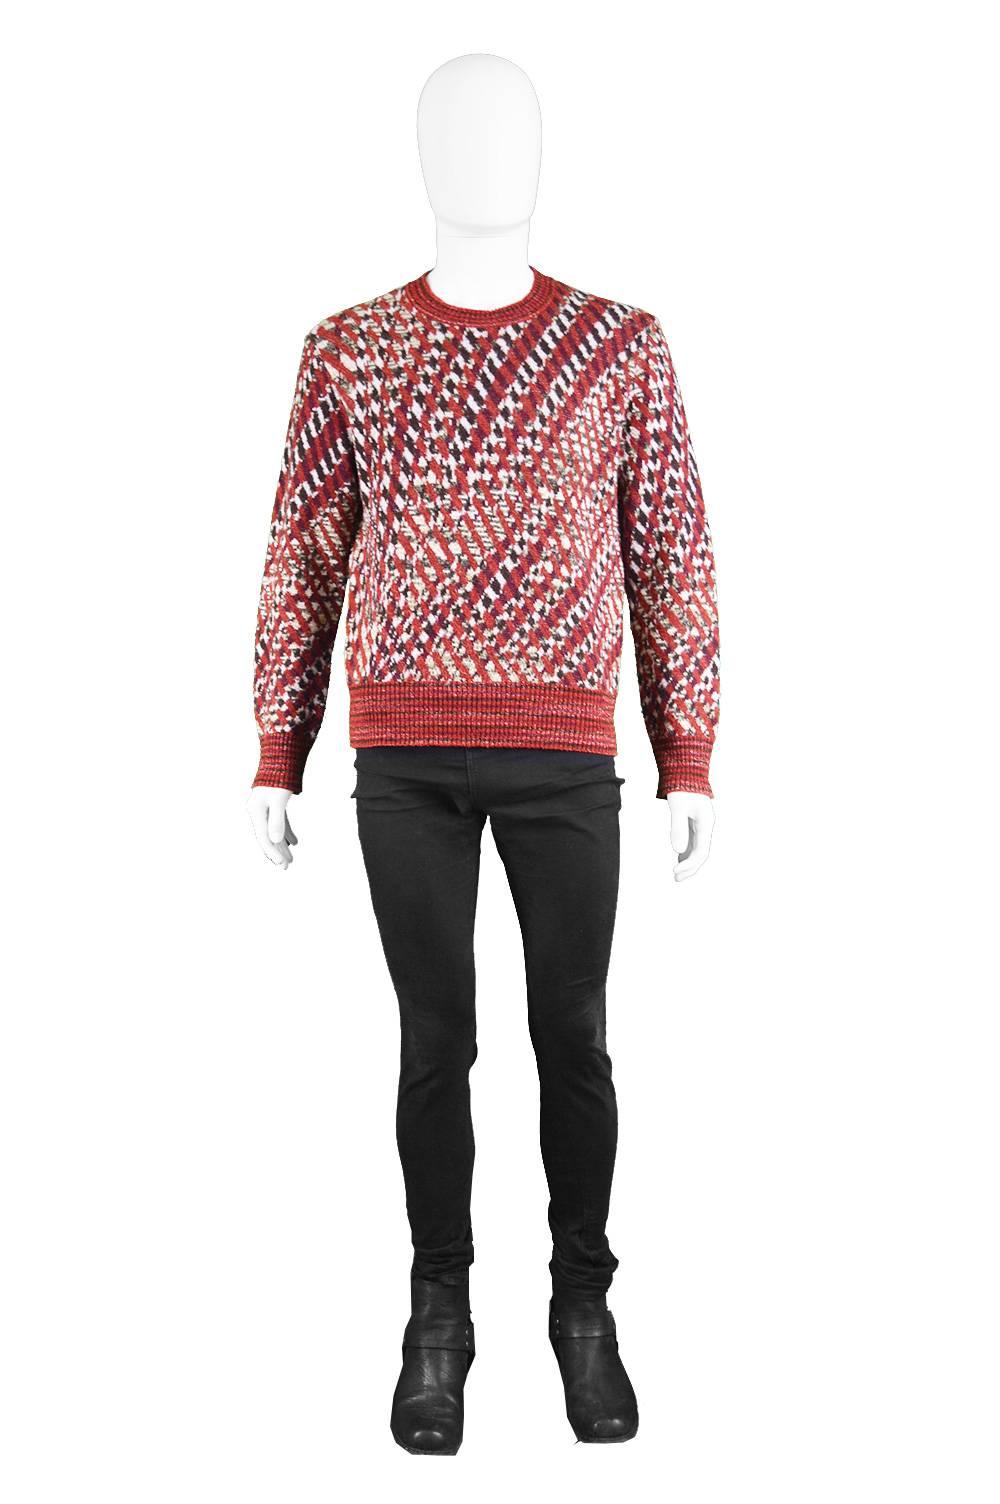  Missoni Men's Vintage 1980s Red Patterned Wool Rayon & Mohair Blend Sweater

Size: Marked 50 which is roughly a men's Medium.
Chest - 42” / 106cm (has a slightly loose fit on chest as most jumpers do)
Length (Shoulder to Hem) - 24” / 61cm
Shoulder